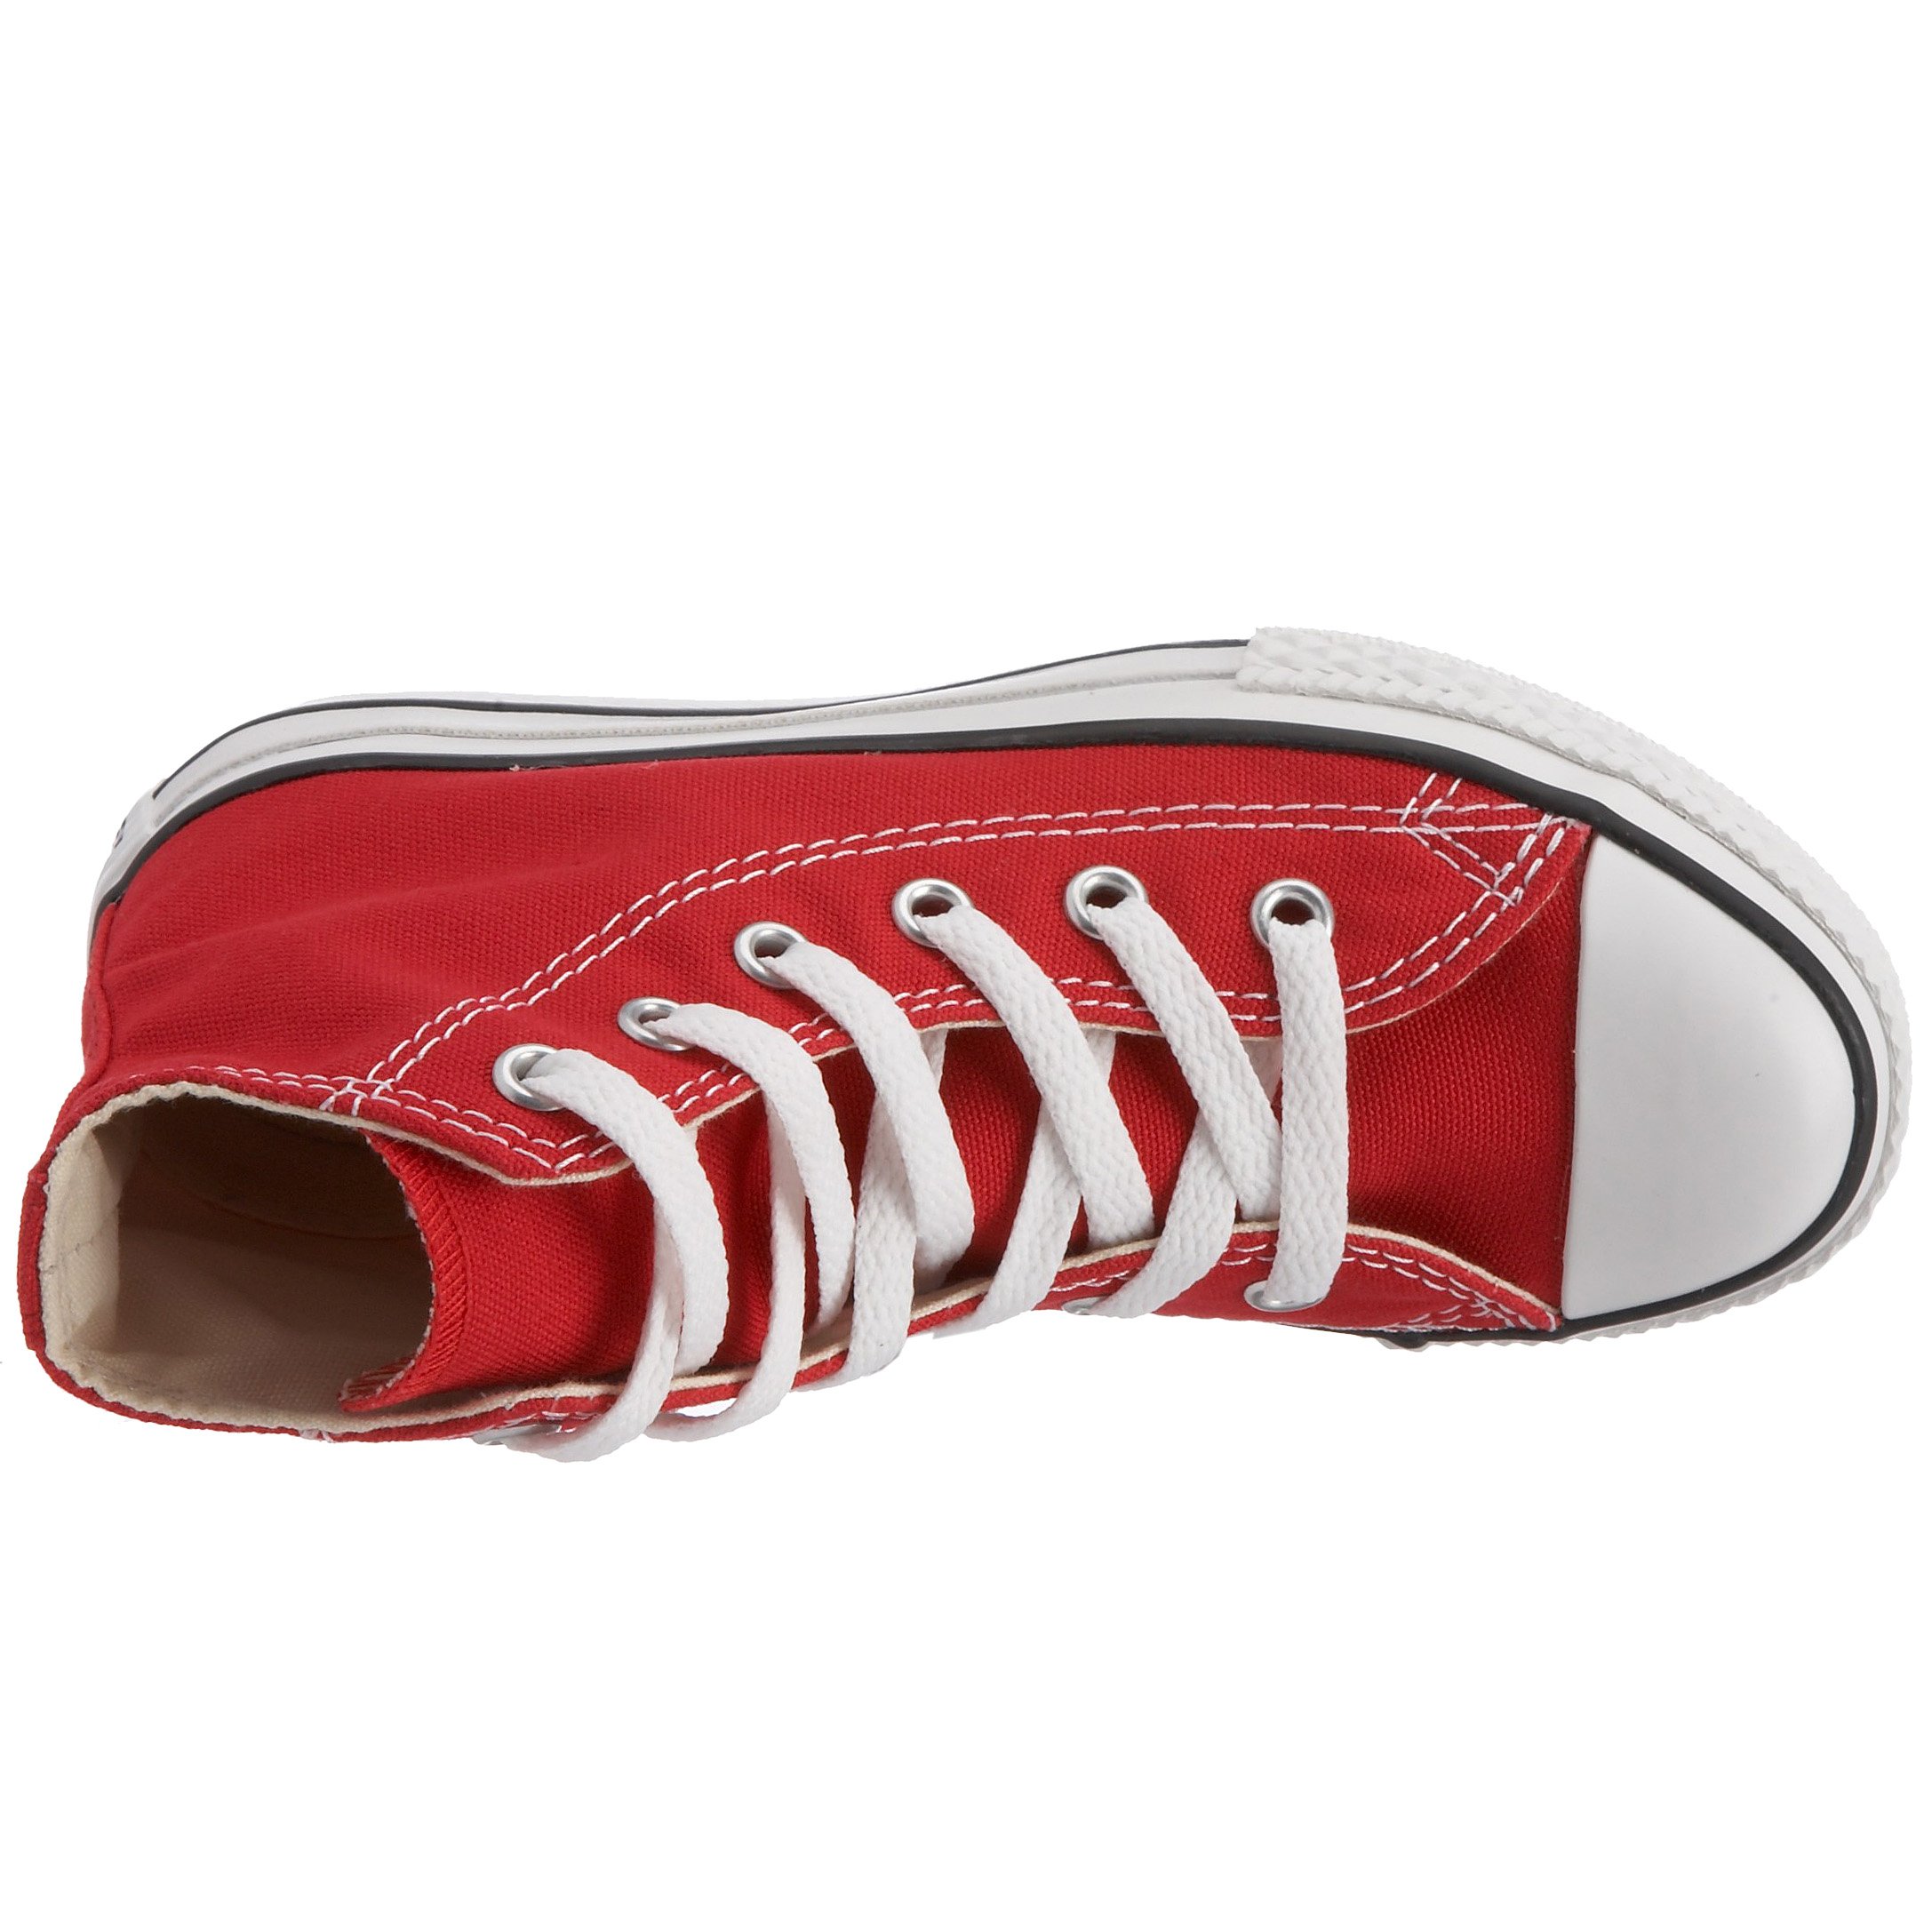 Children's Converse Chuck Taylor All Star High Top Sneaker - image 5 of 11